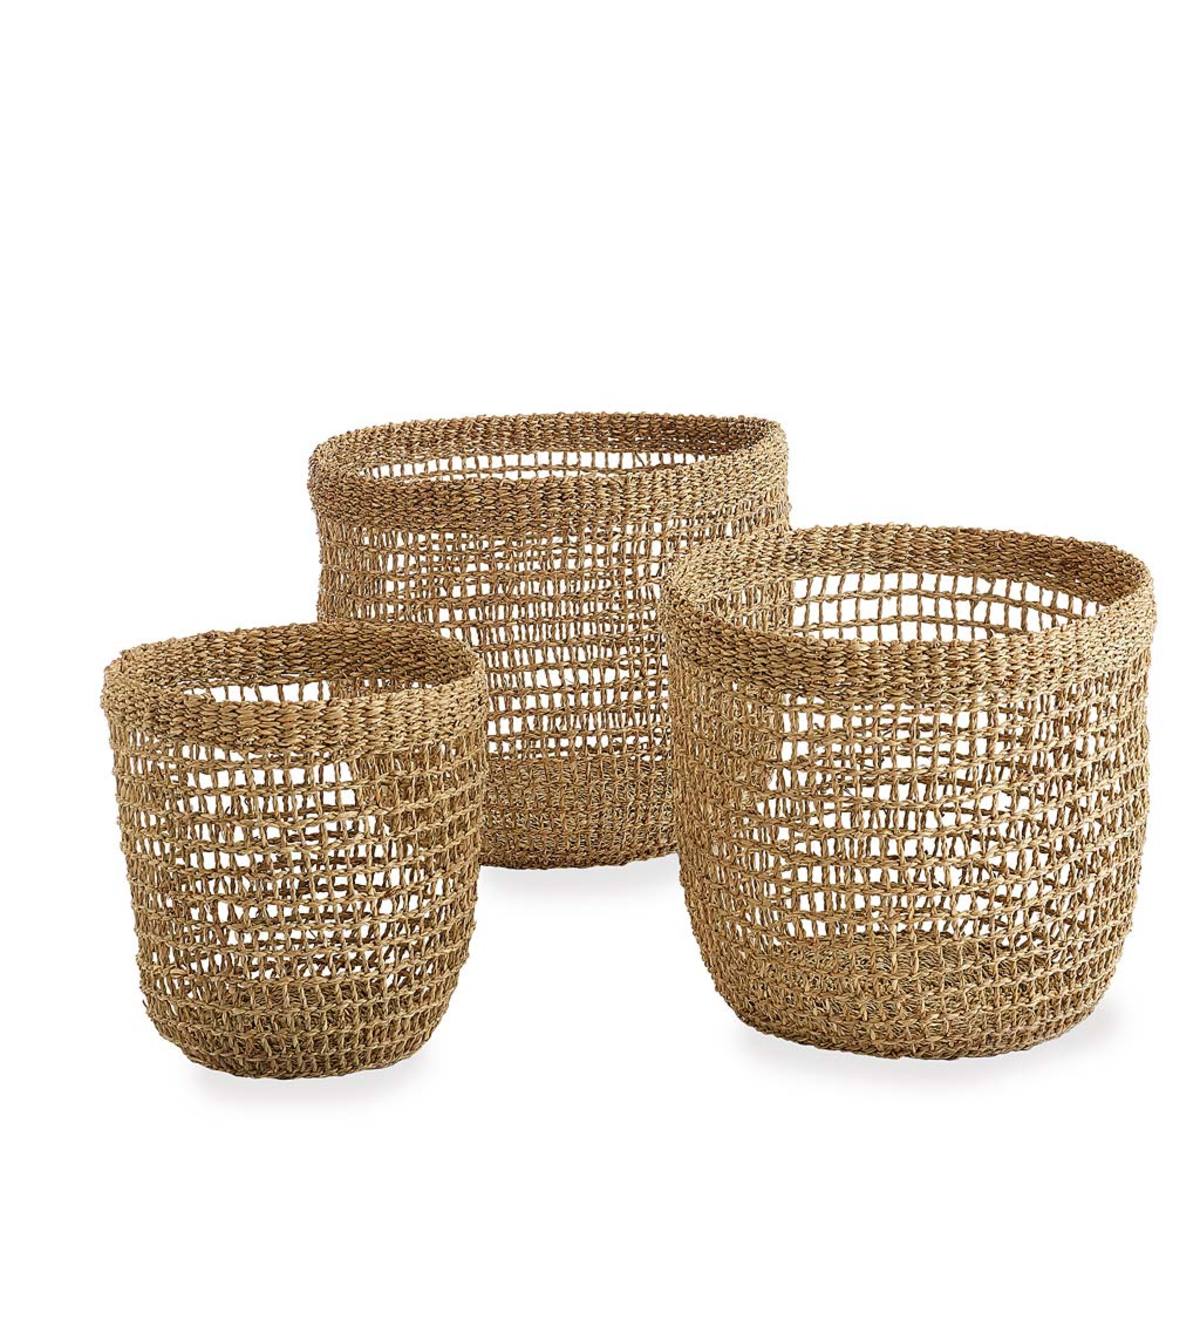 Woven Seagrass Baskets, Set of 3